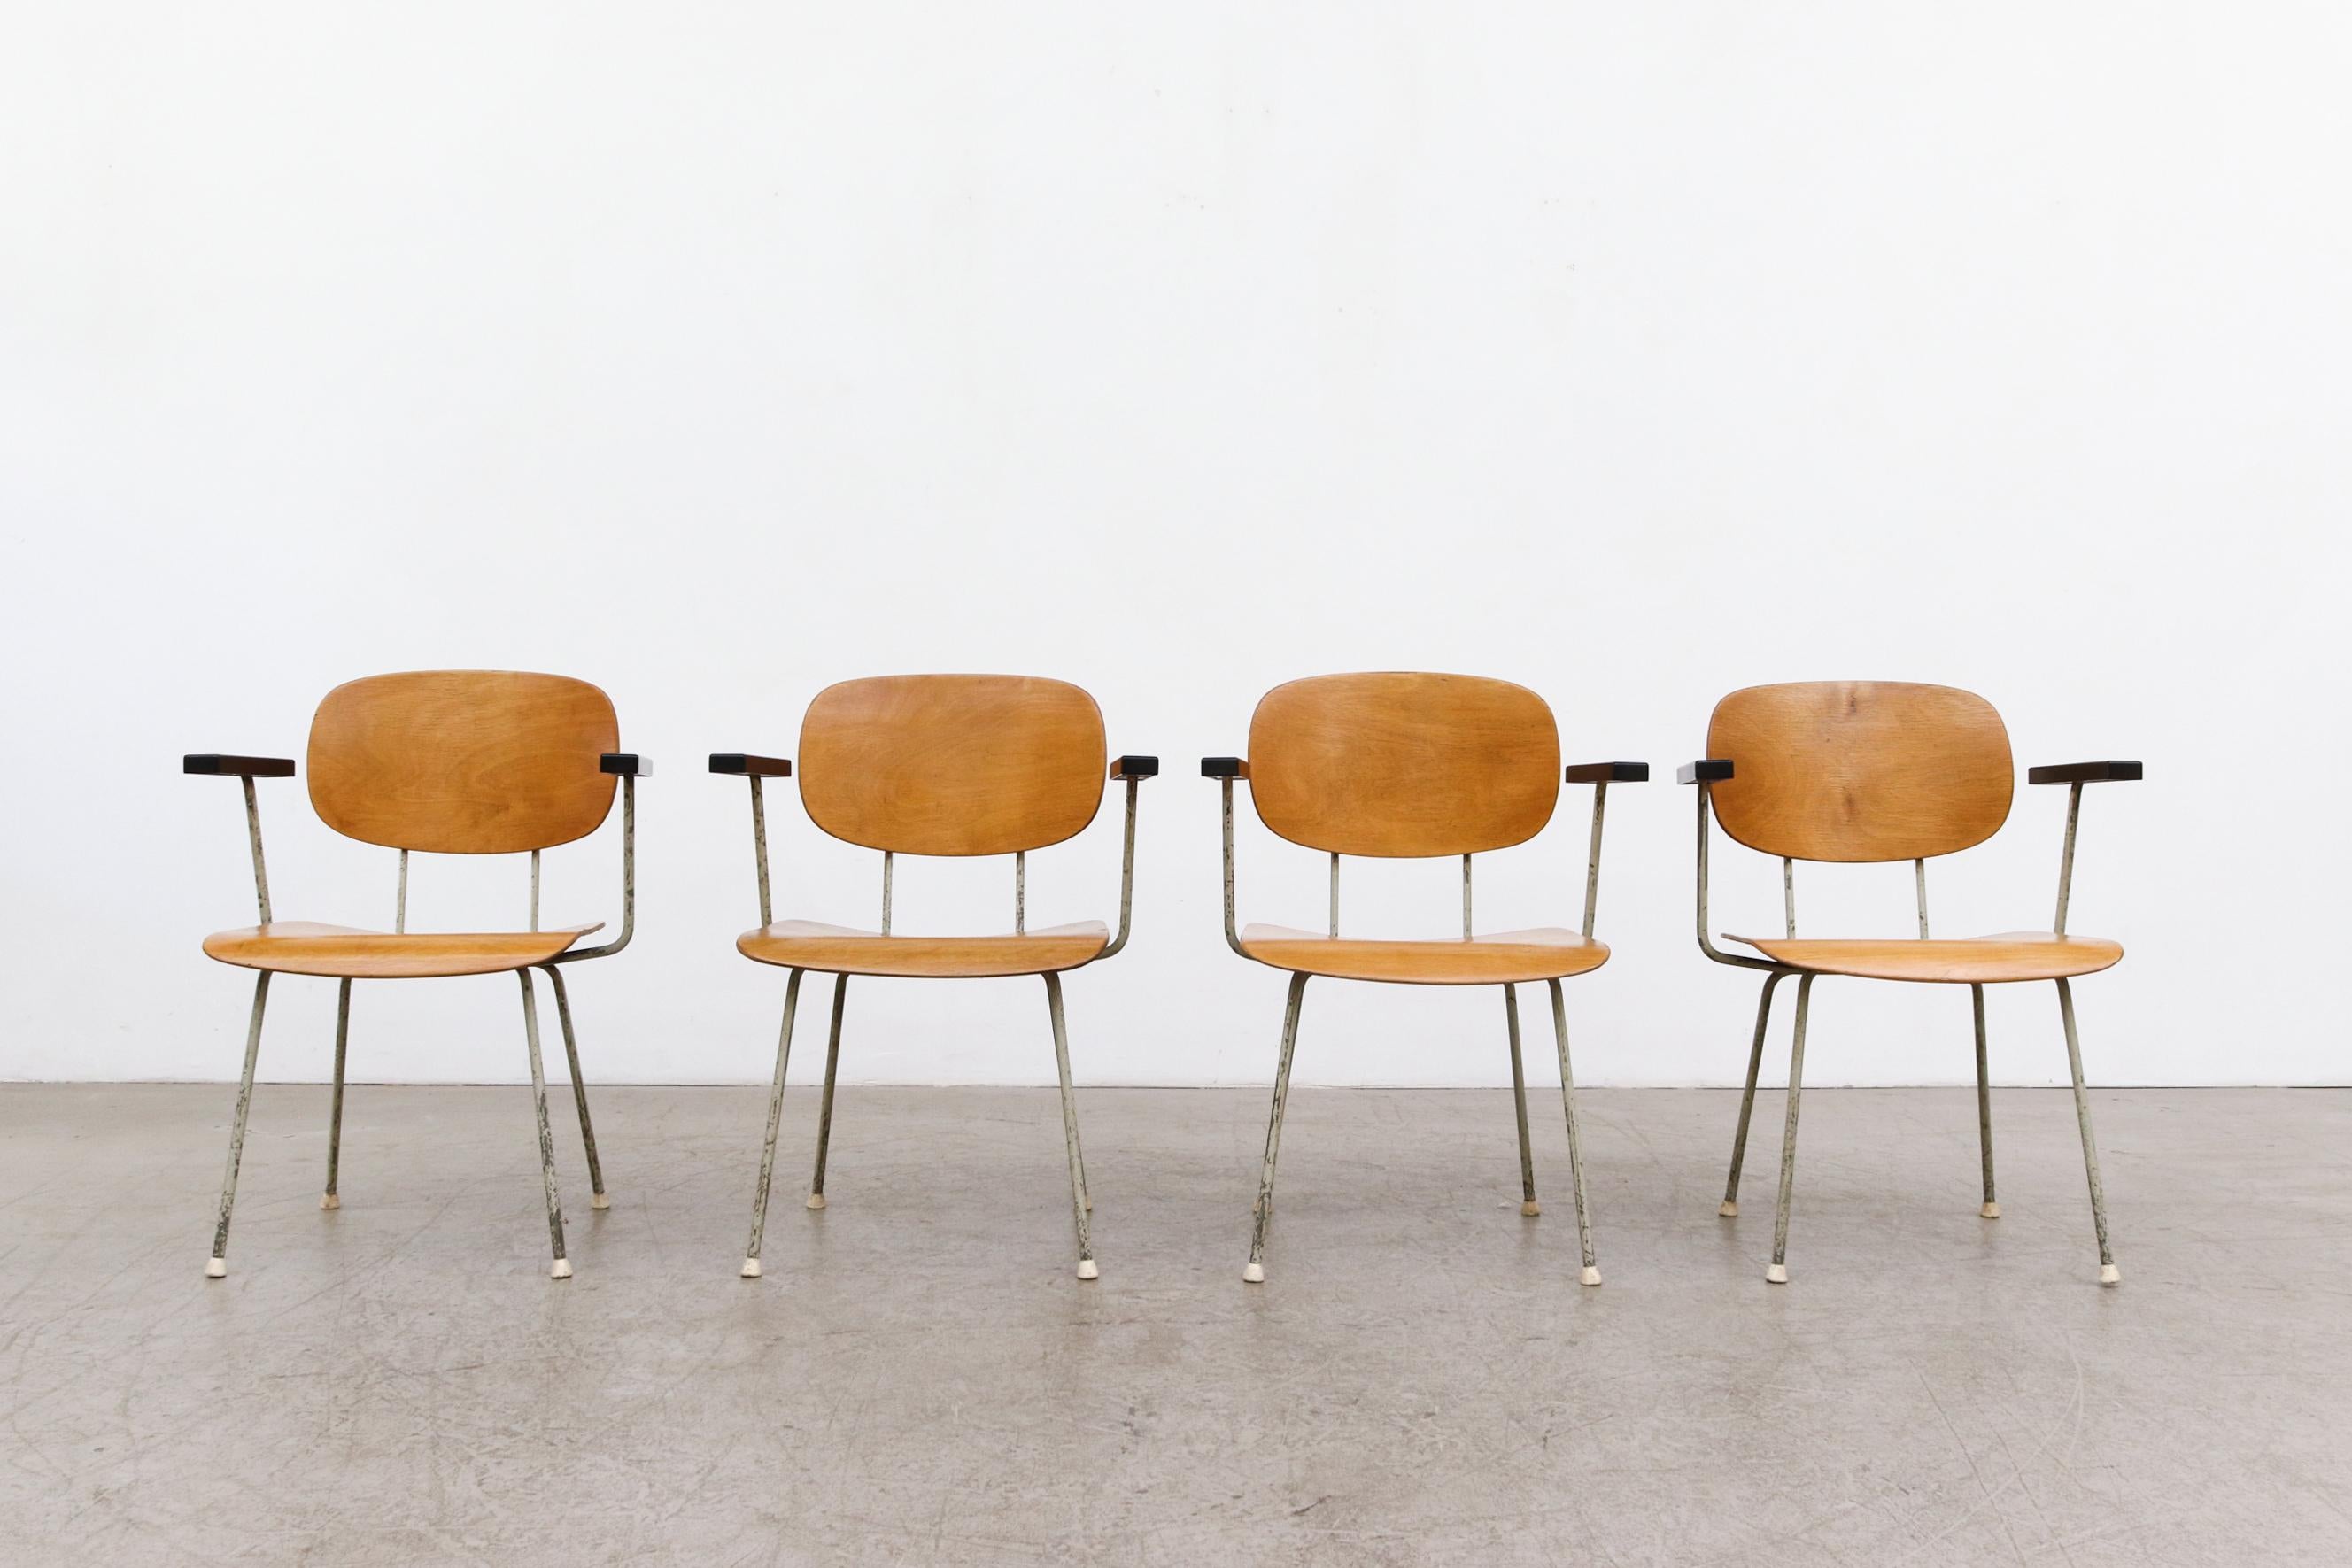 Mid Century Dutch great Wim Rietveld's Model 216 arm chairs with lightly refinished beech plywood seating and black bakelite armrests. Original frames with some visible wear and patina. New rubber mounts glued on bottoms, as a replacement for the